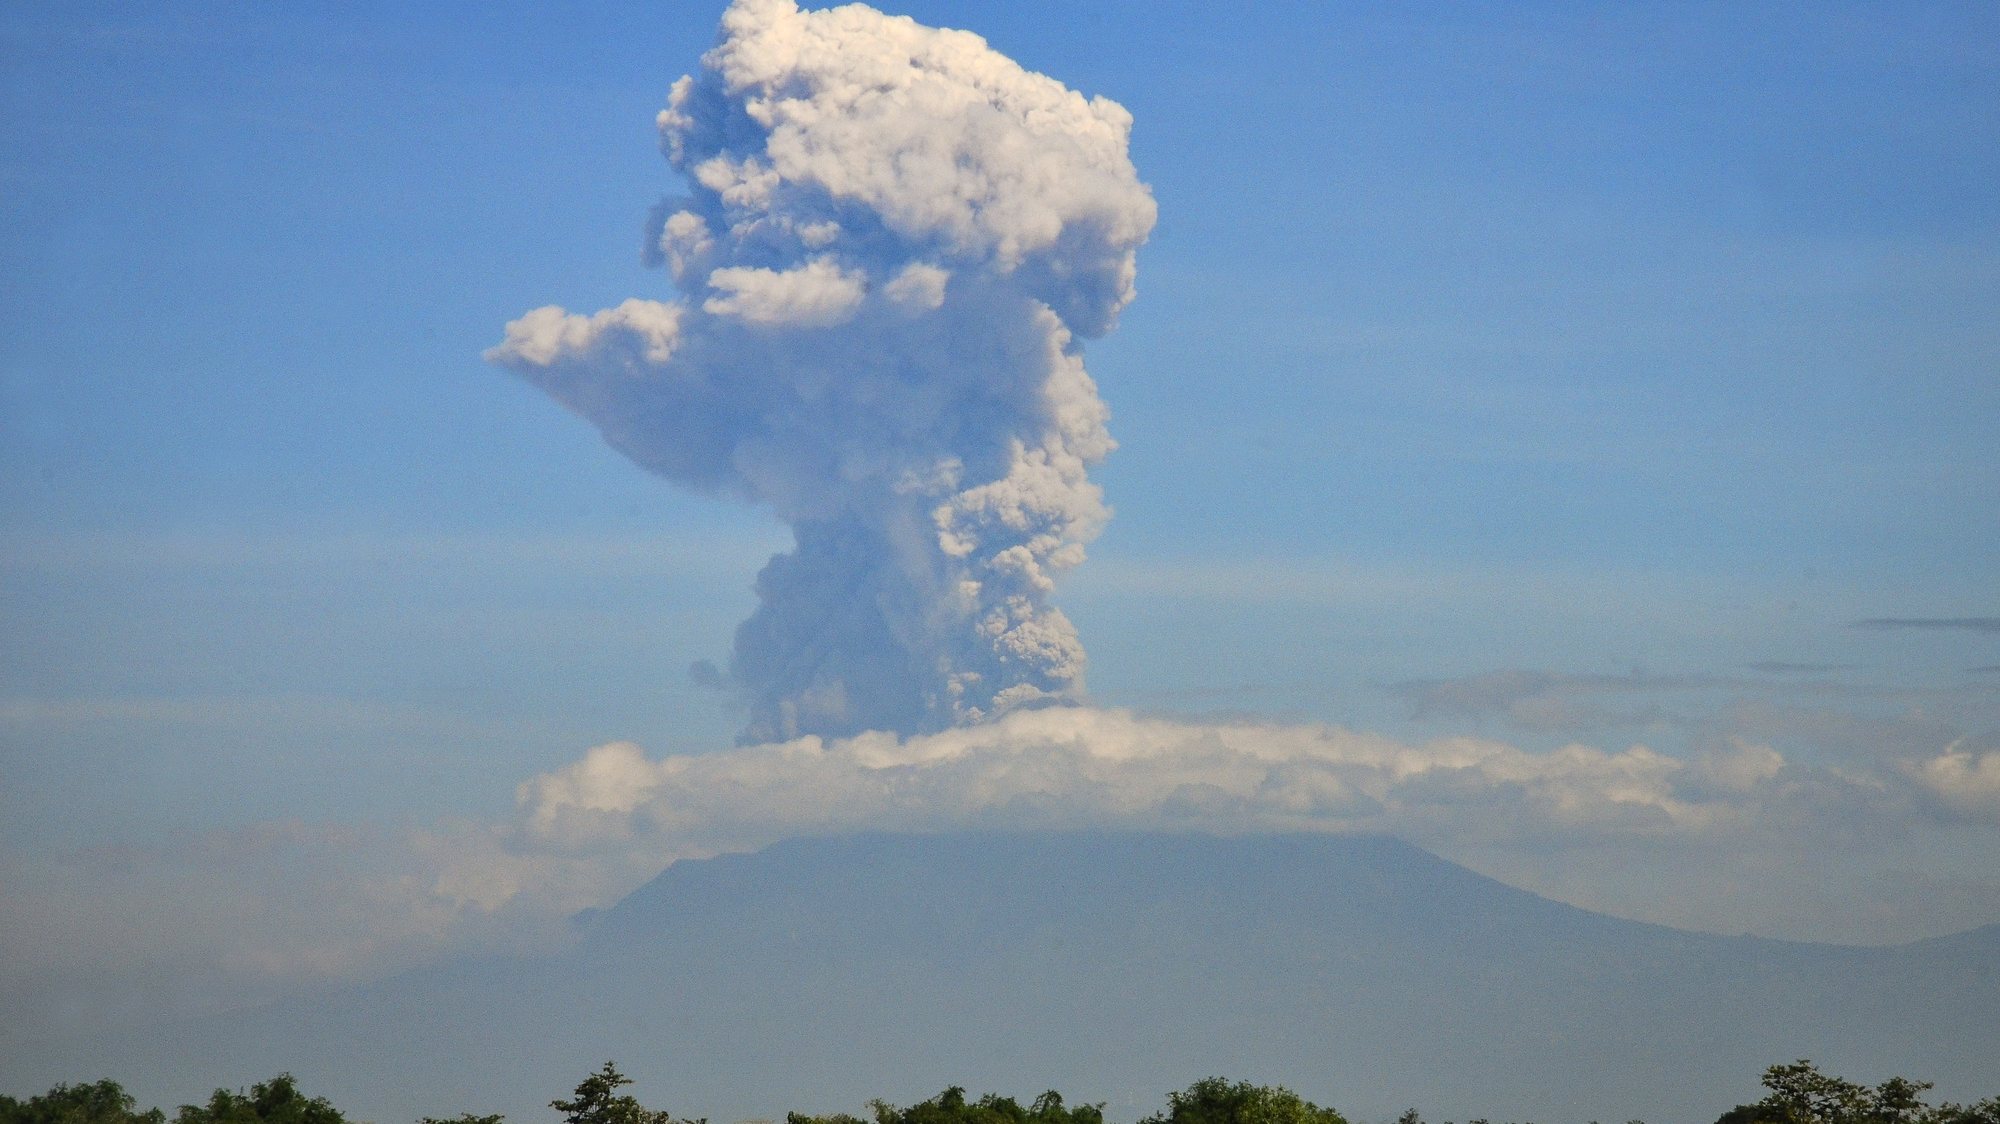 epa08500198 Mount Merapi spews volcanic ashes during an eruption as seen from Boyolali, Central Java, Indonesia, 21 June 2020. The volcano spewing a 6000-meter column of smoke and ash into the sky.  EPA/STRINGER